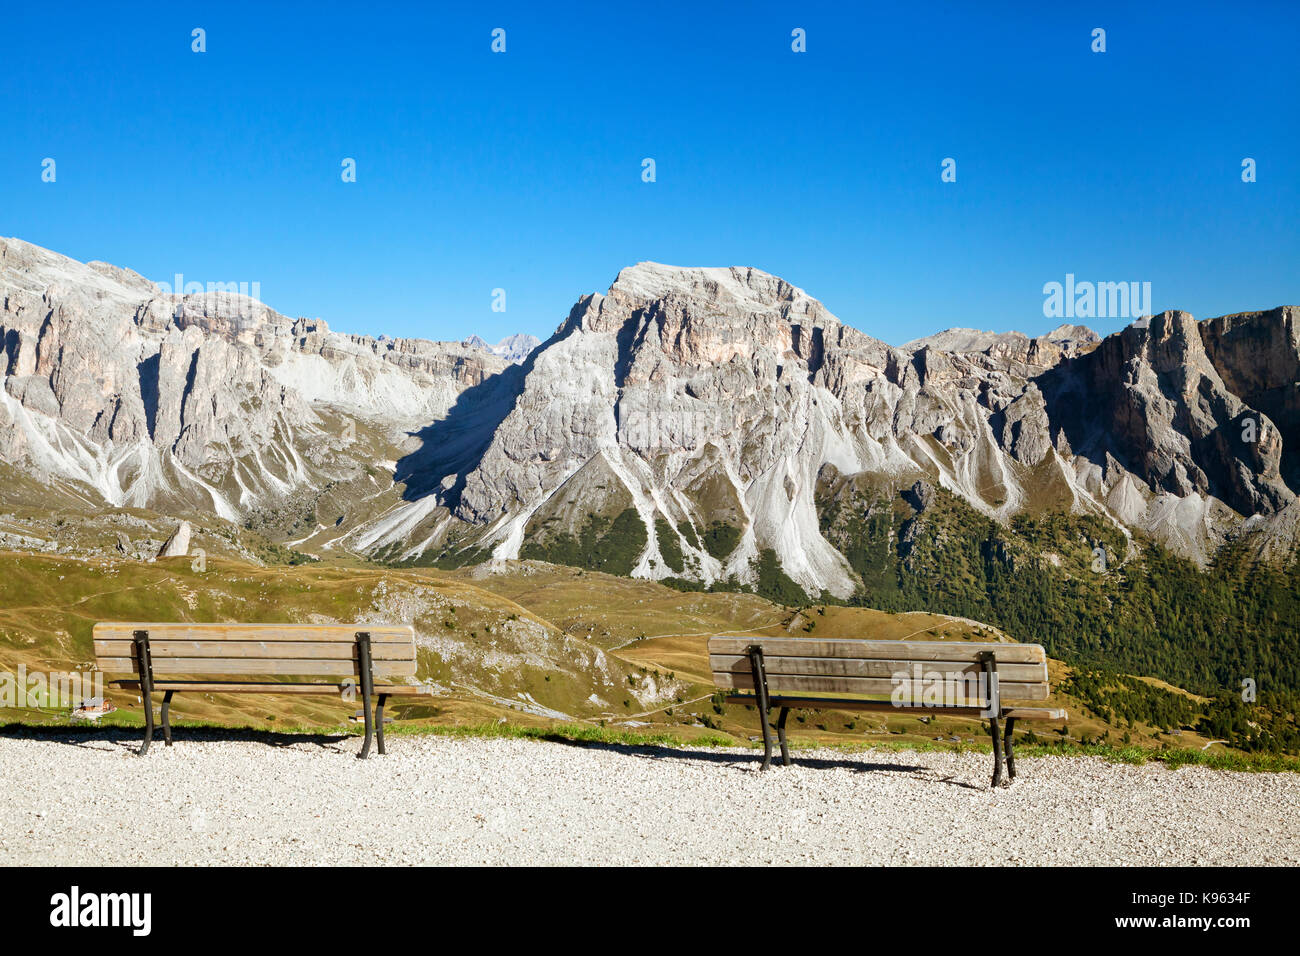 Mountain view of Dolomite Alps with empty benches in the foreground Stock Photo